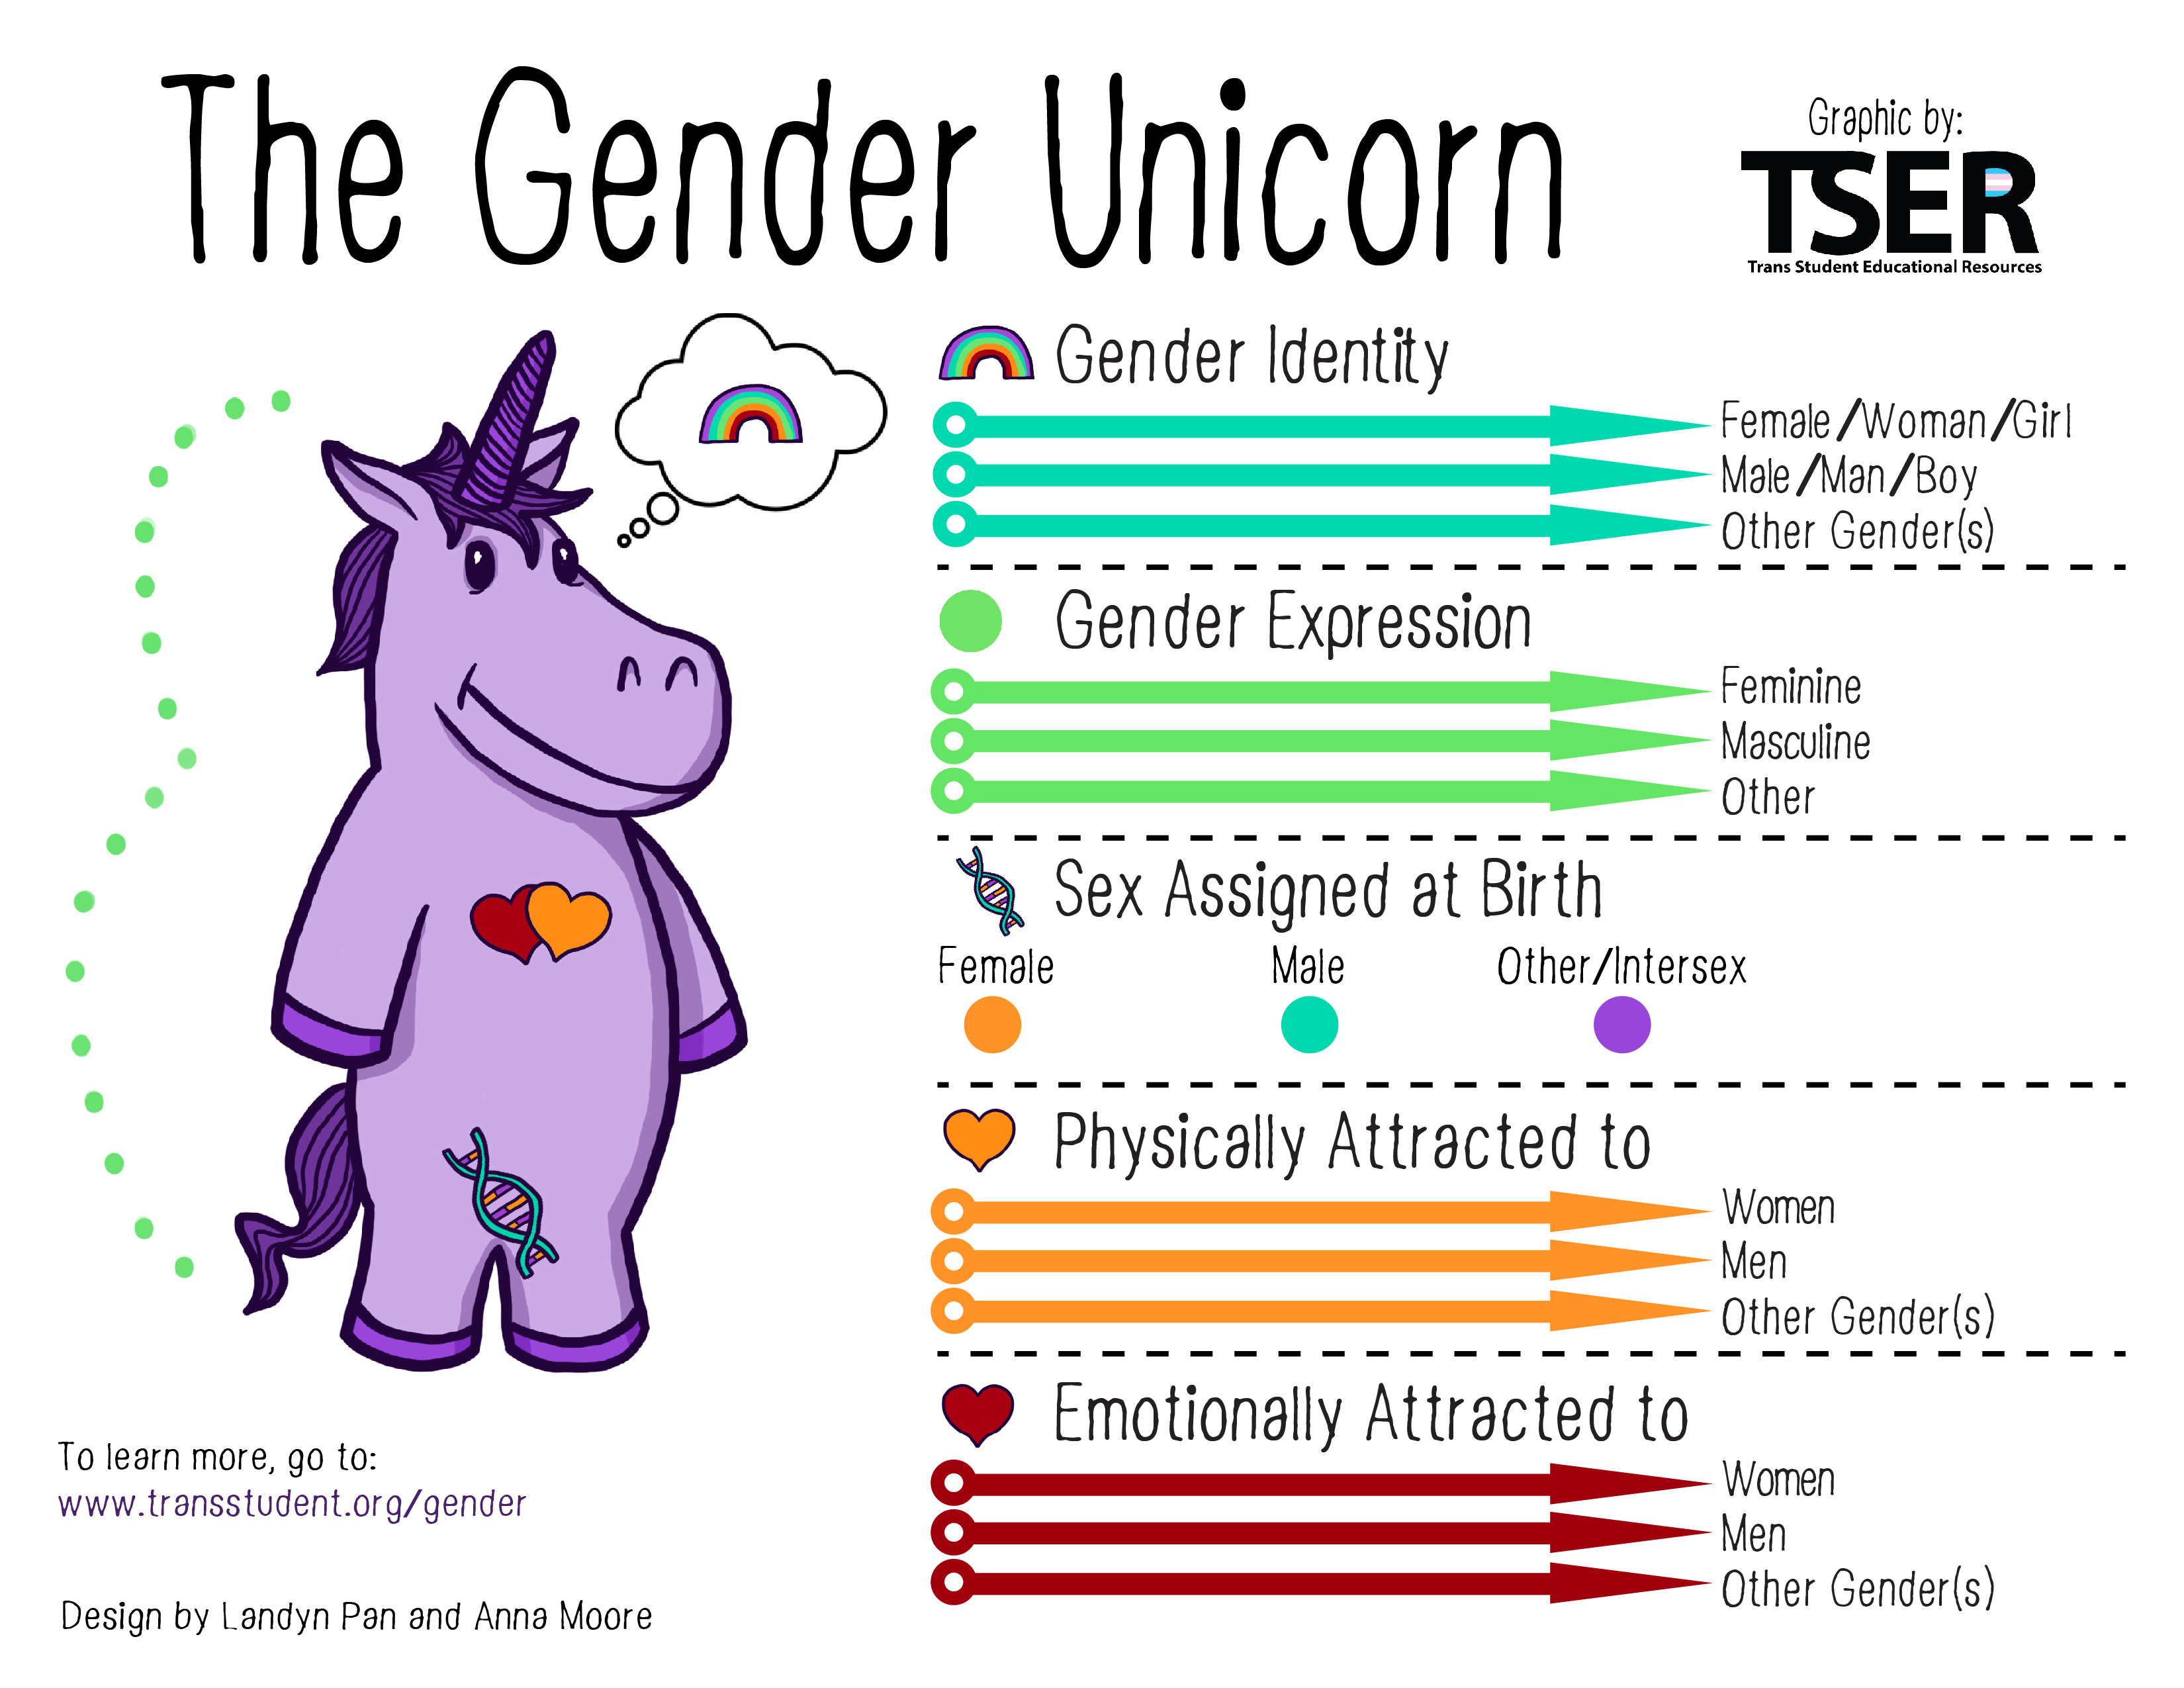 Gender Unicorn Graphic - Shows Gender Identity, Gender Expression, Physical Attraction and Emotional Attraction as a spectrum. Sex is broken down into Female, Male, Intersex/Other.